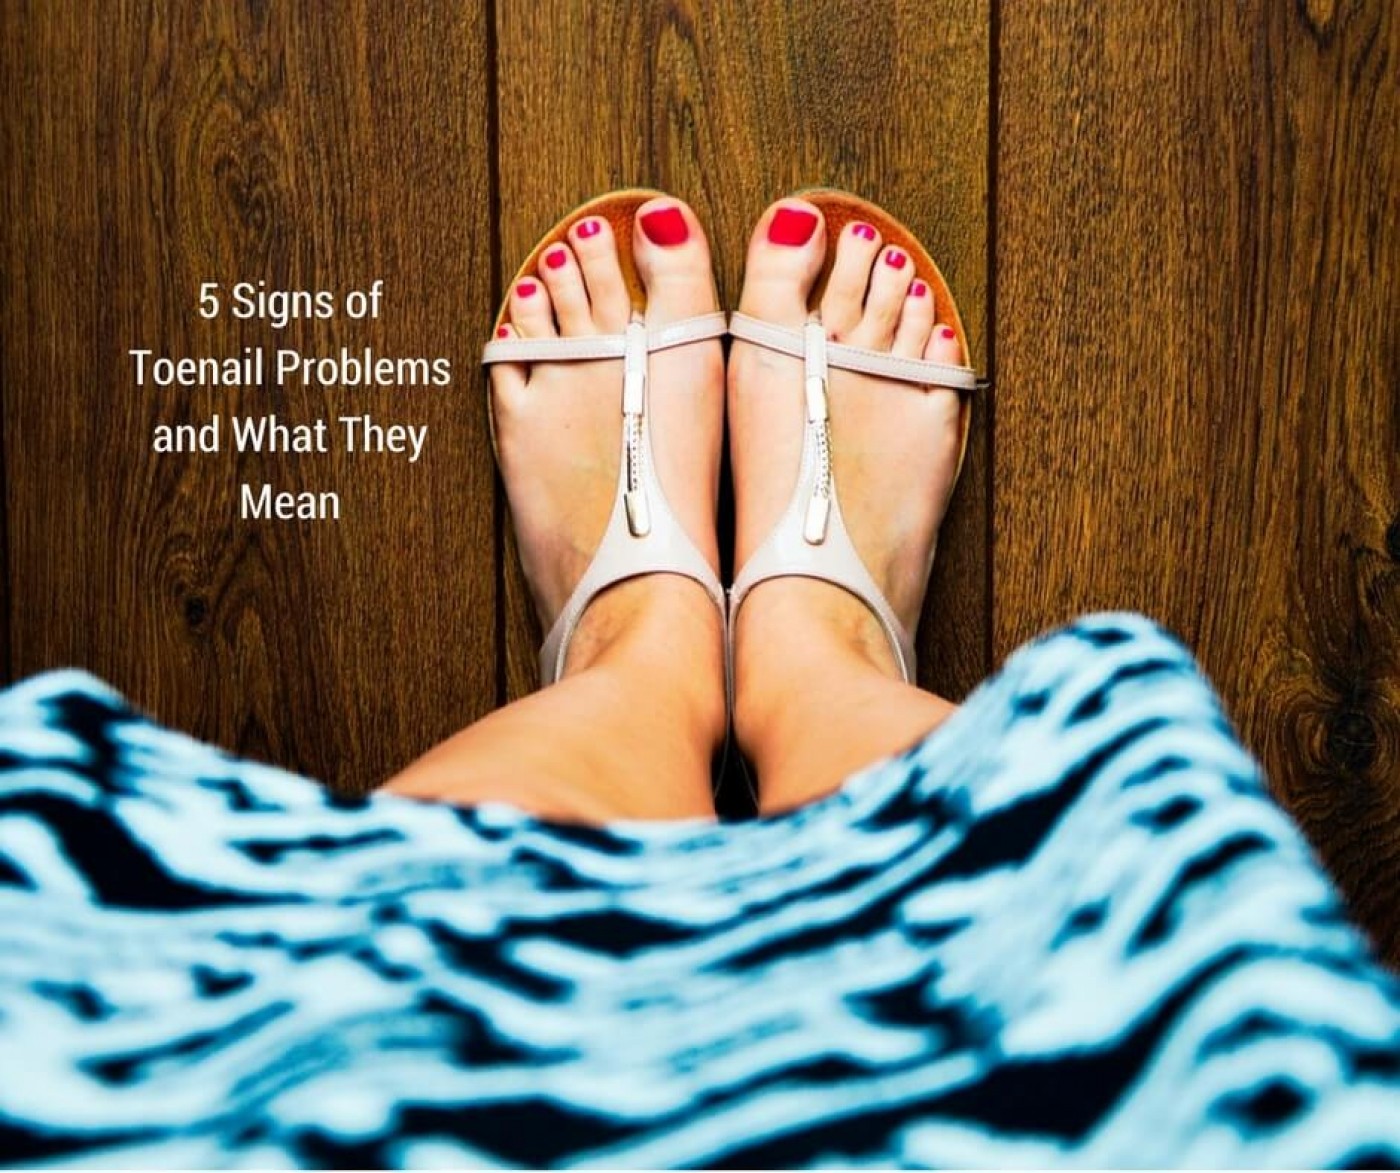 5 Signs of Toenail Problems and What They Mean